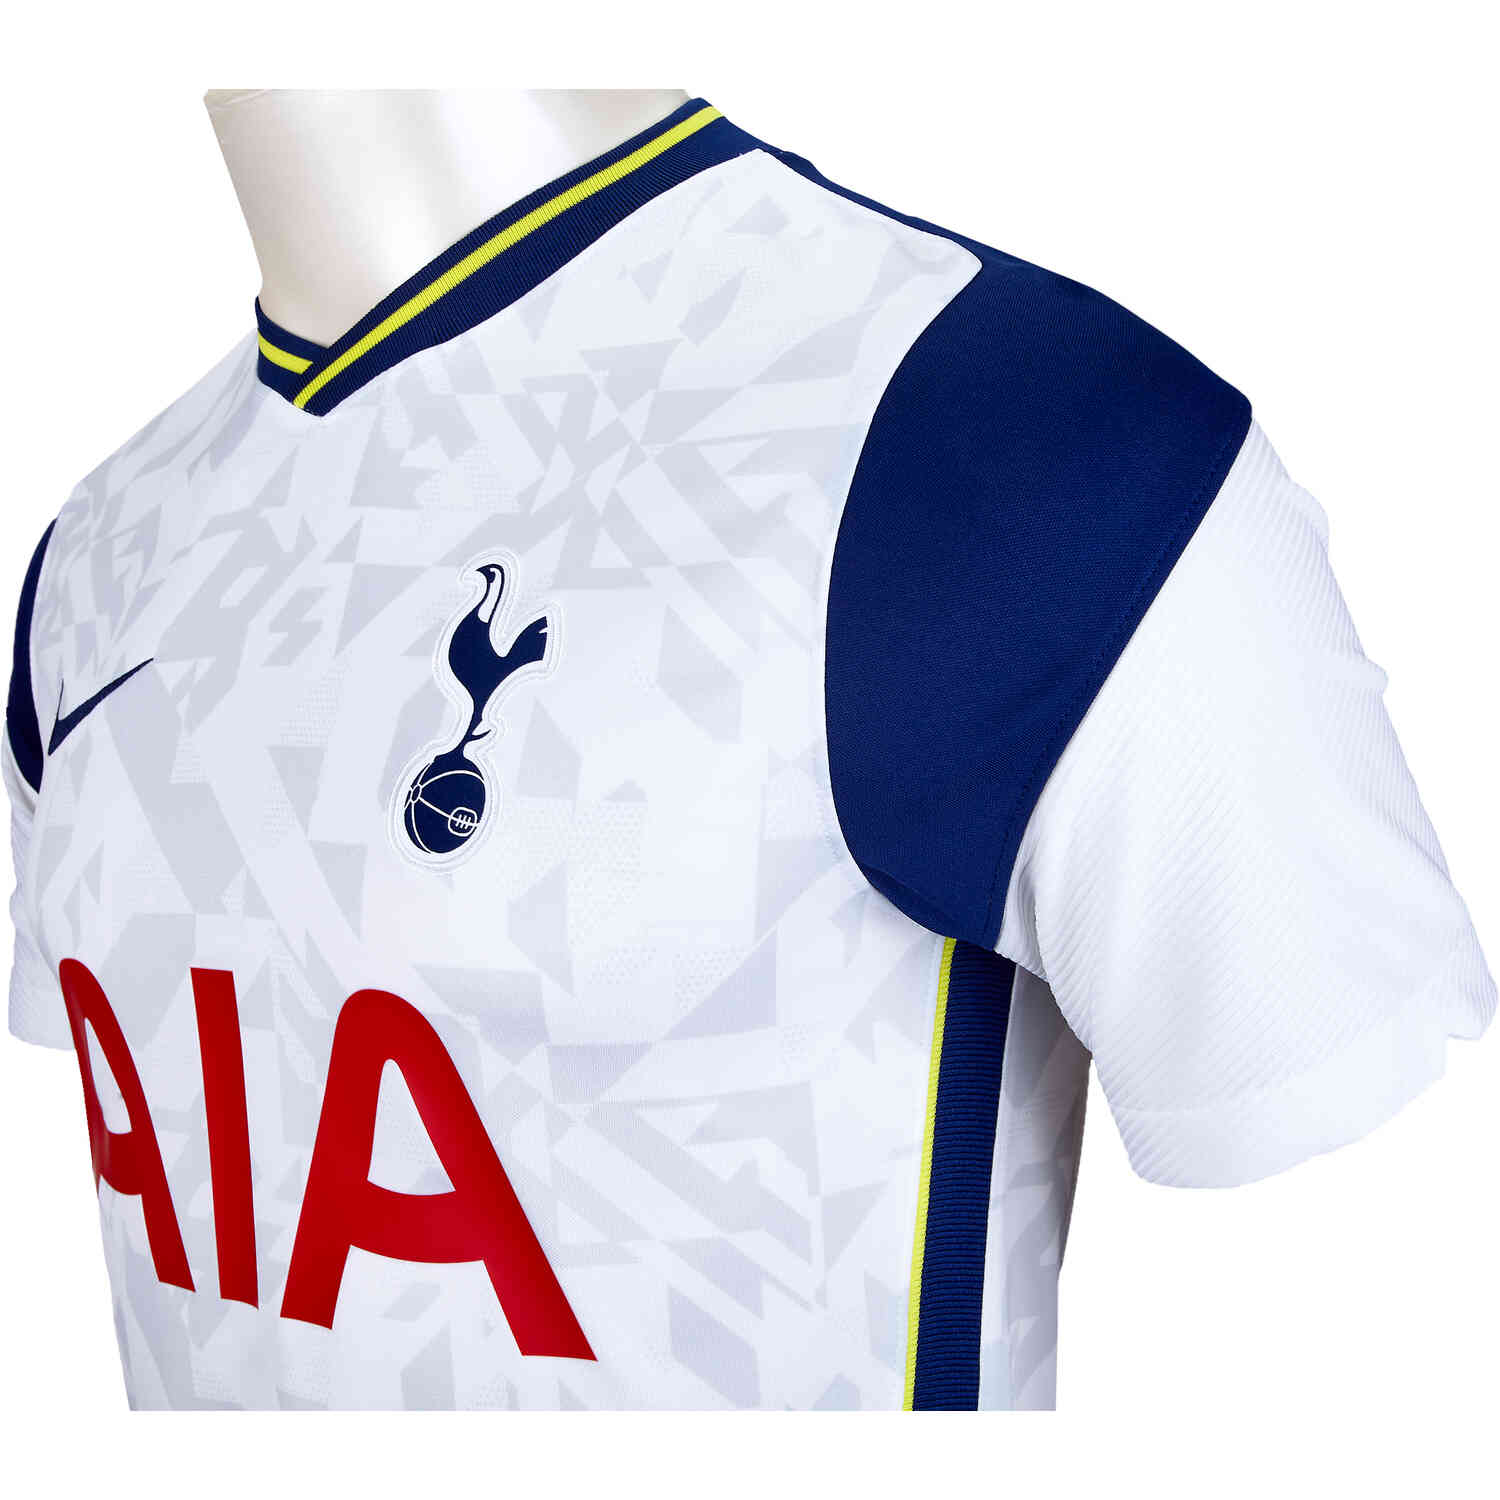 Nike Tottenham Hotspur Son 2020/21 Home Jersey Unboxing + Review 